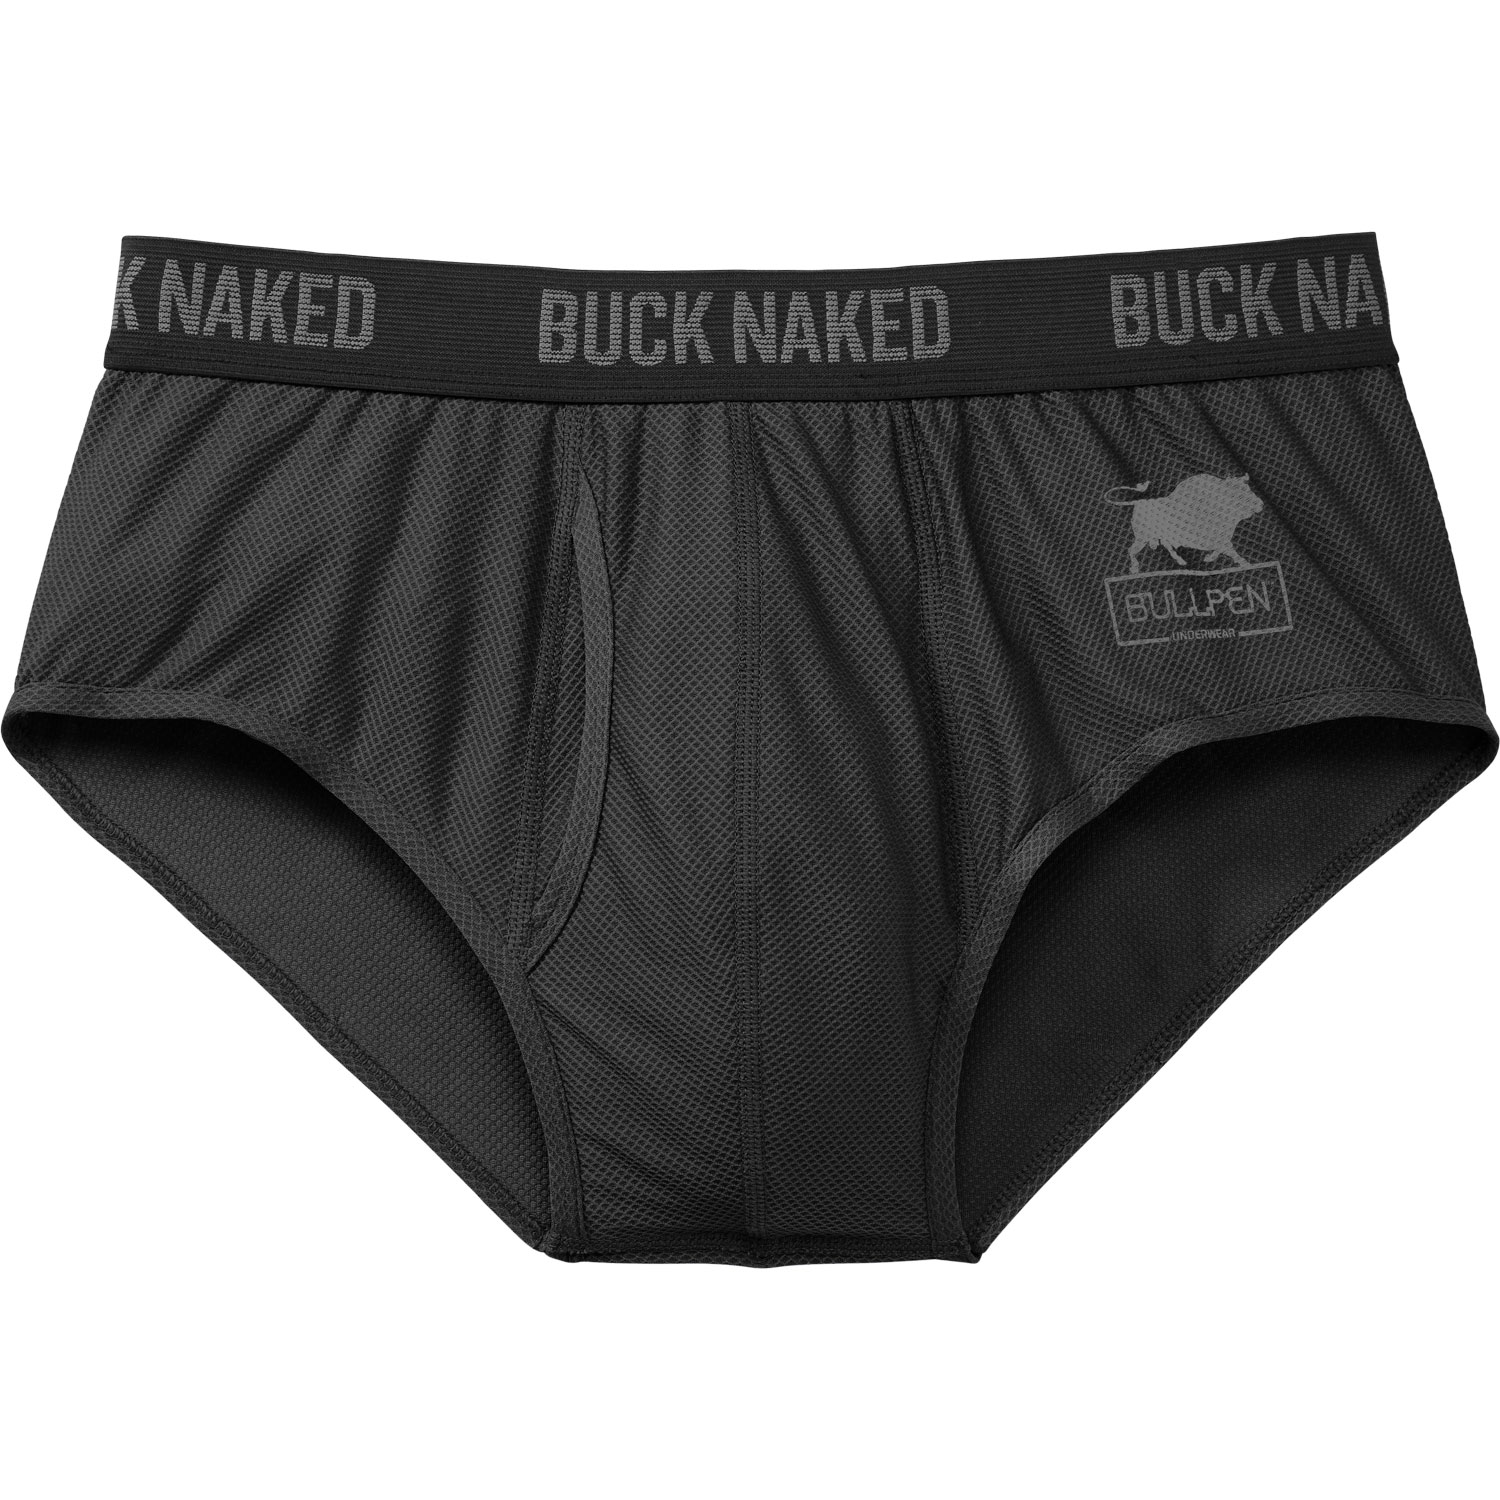 Make merry MONUMENTAL with Duluth Buck Naked® underwear! 